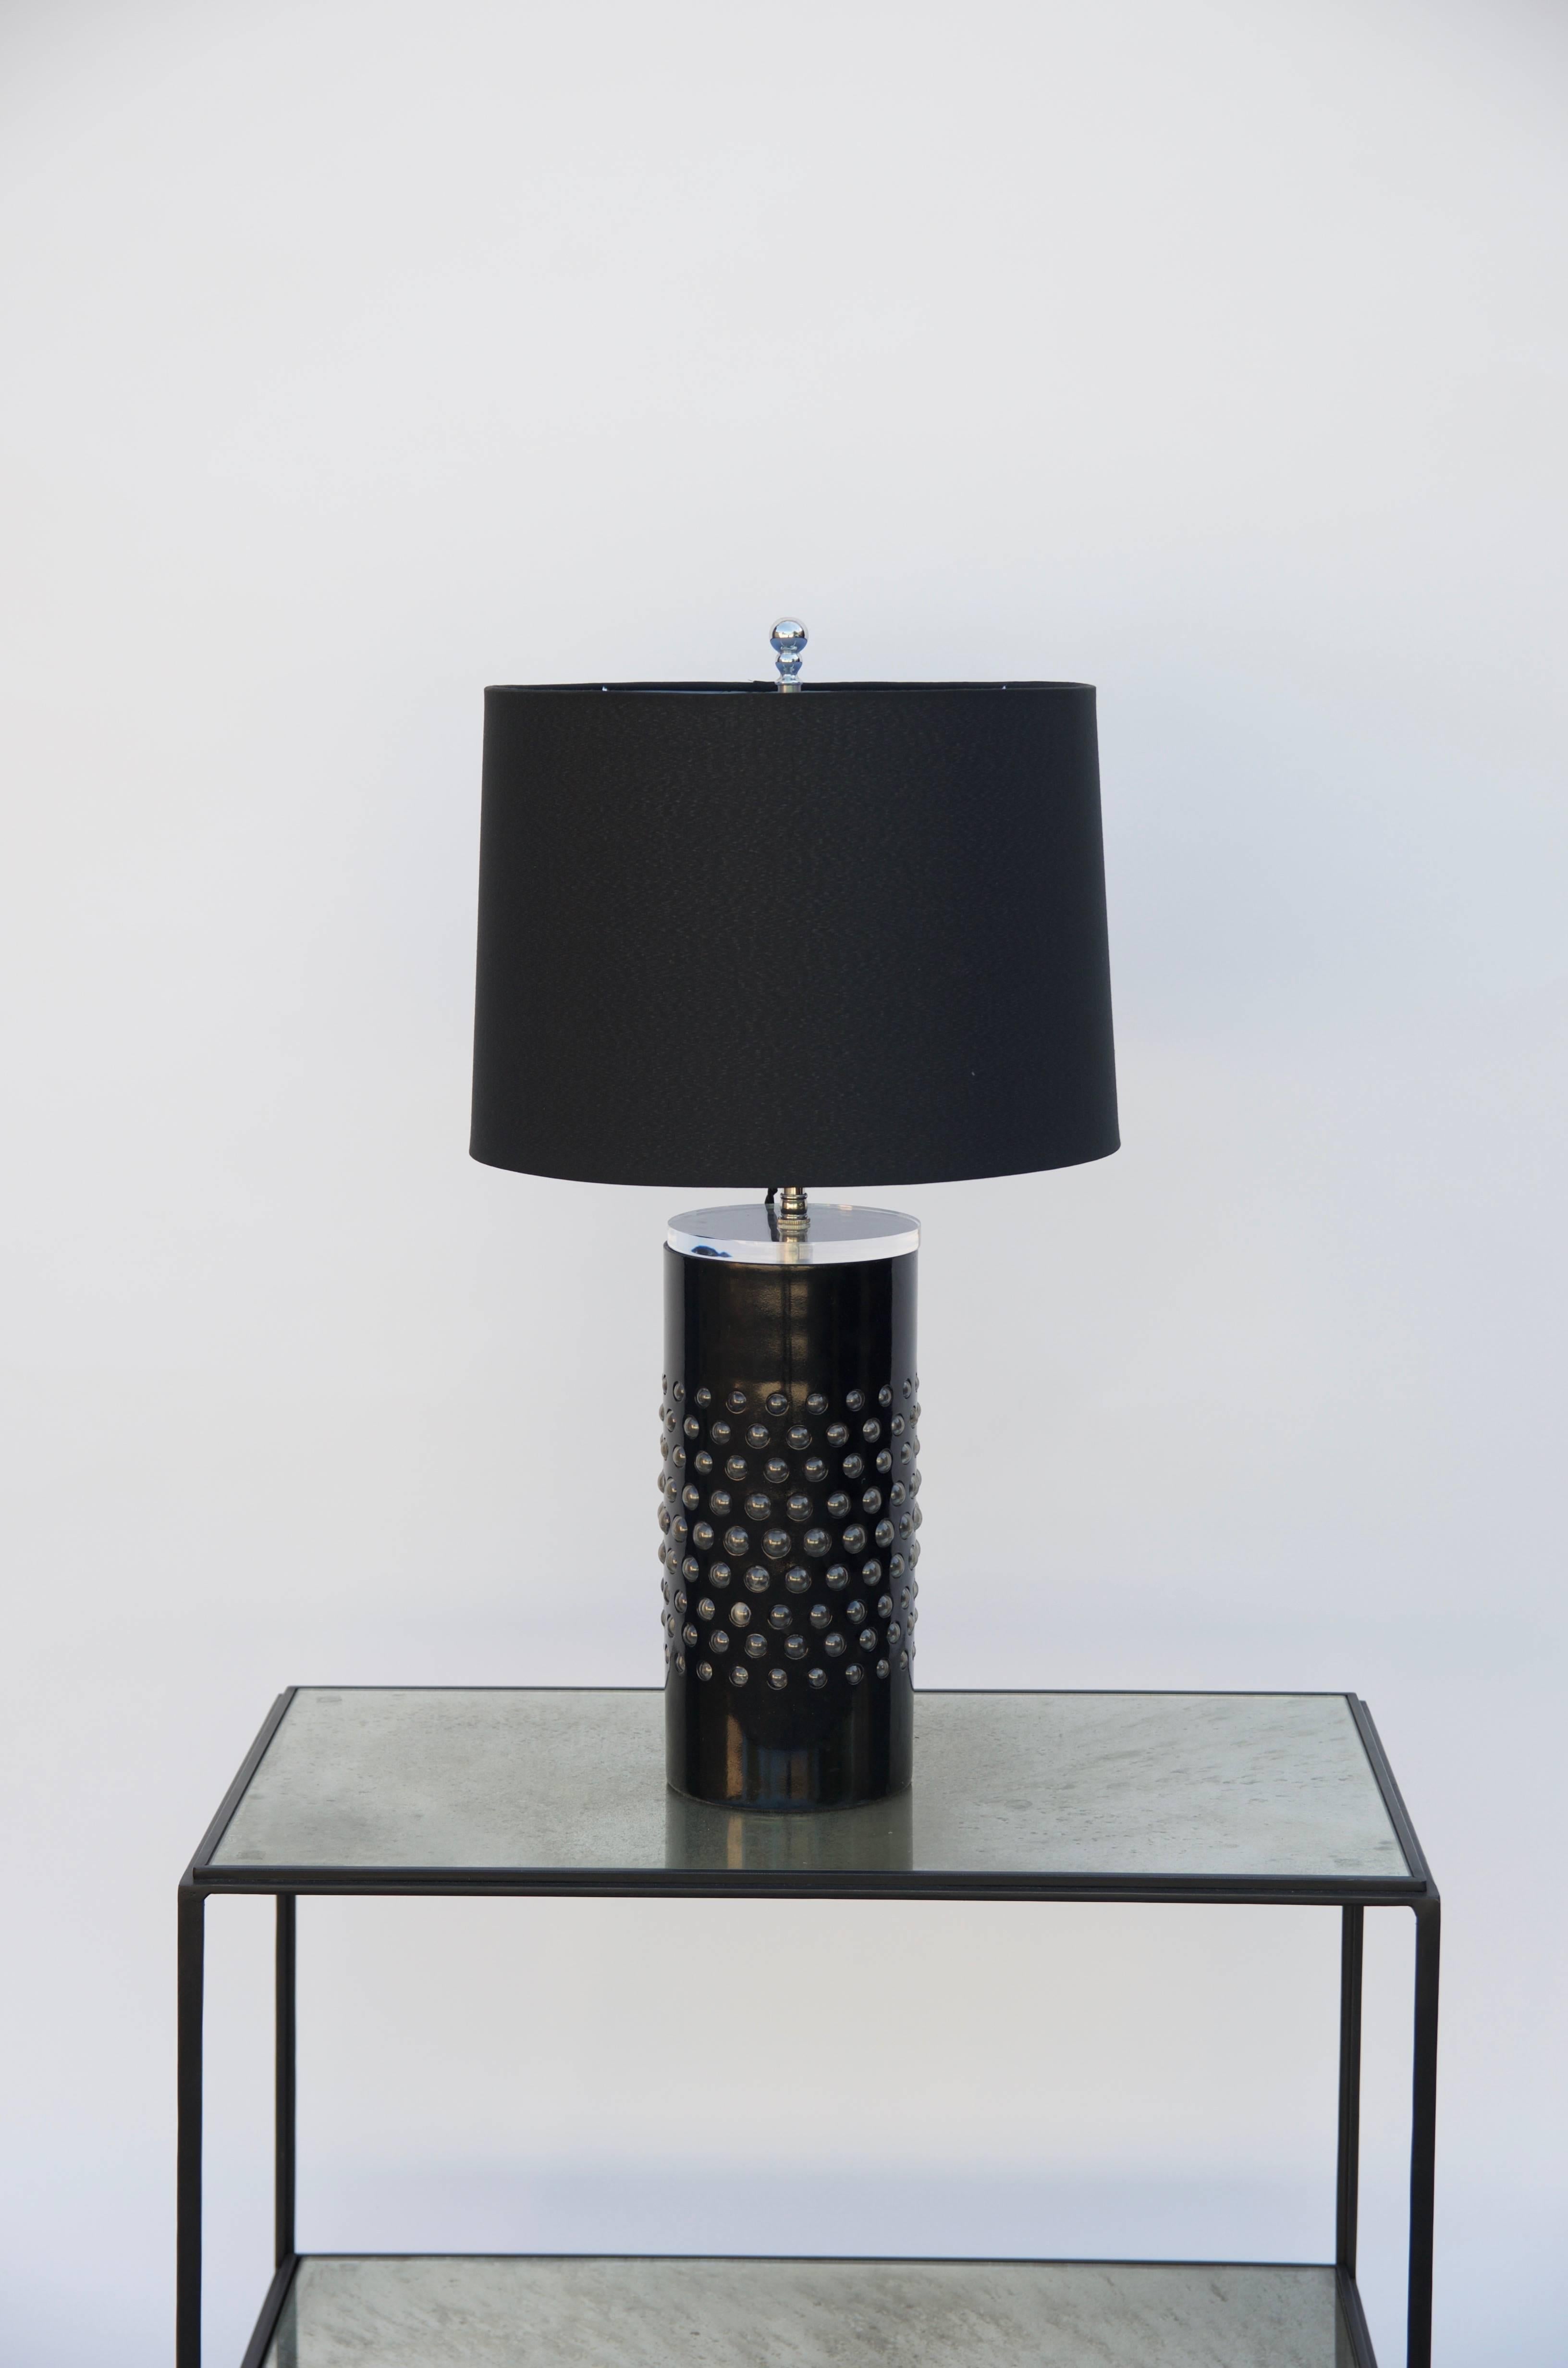 Pair of unusual textured glass cylinder lamps with custom shades, circa 1980. Rewired with custom black silk shades. The transparent top piece of the columns lets the light through the base glass ball openings.

Drum shade measurements: 13 in.